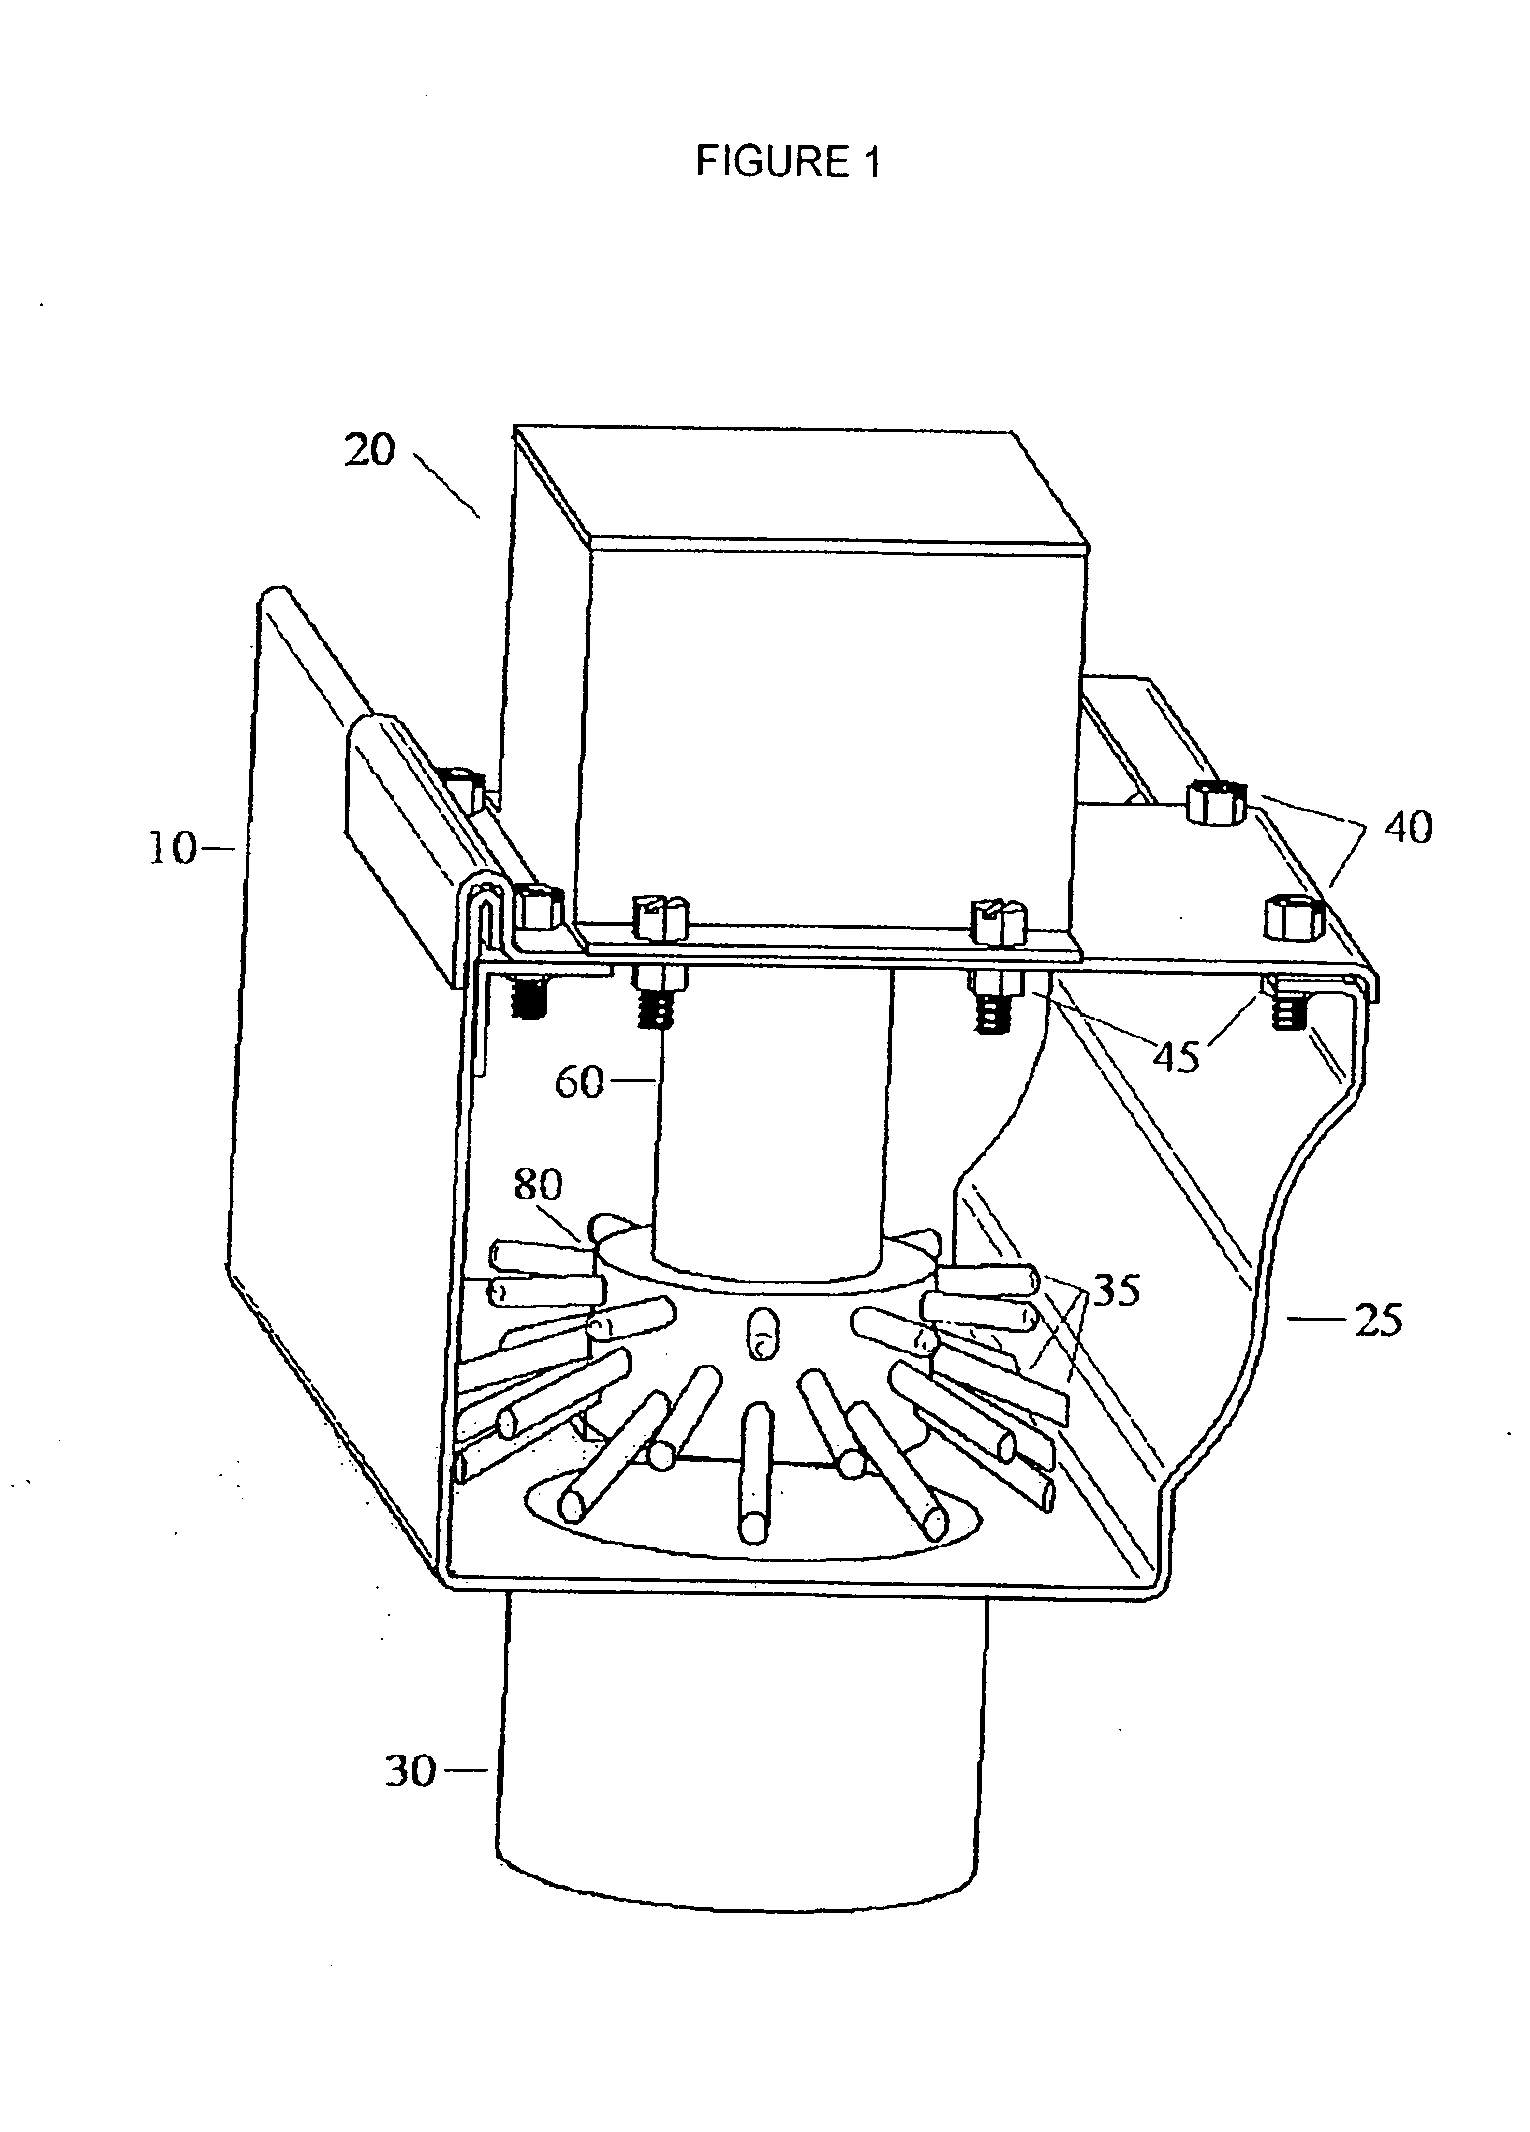 Method and apparatus for removal of gutter debris